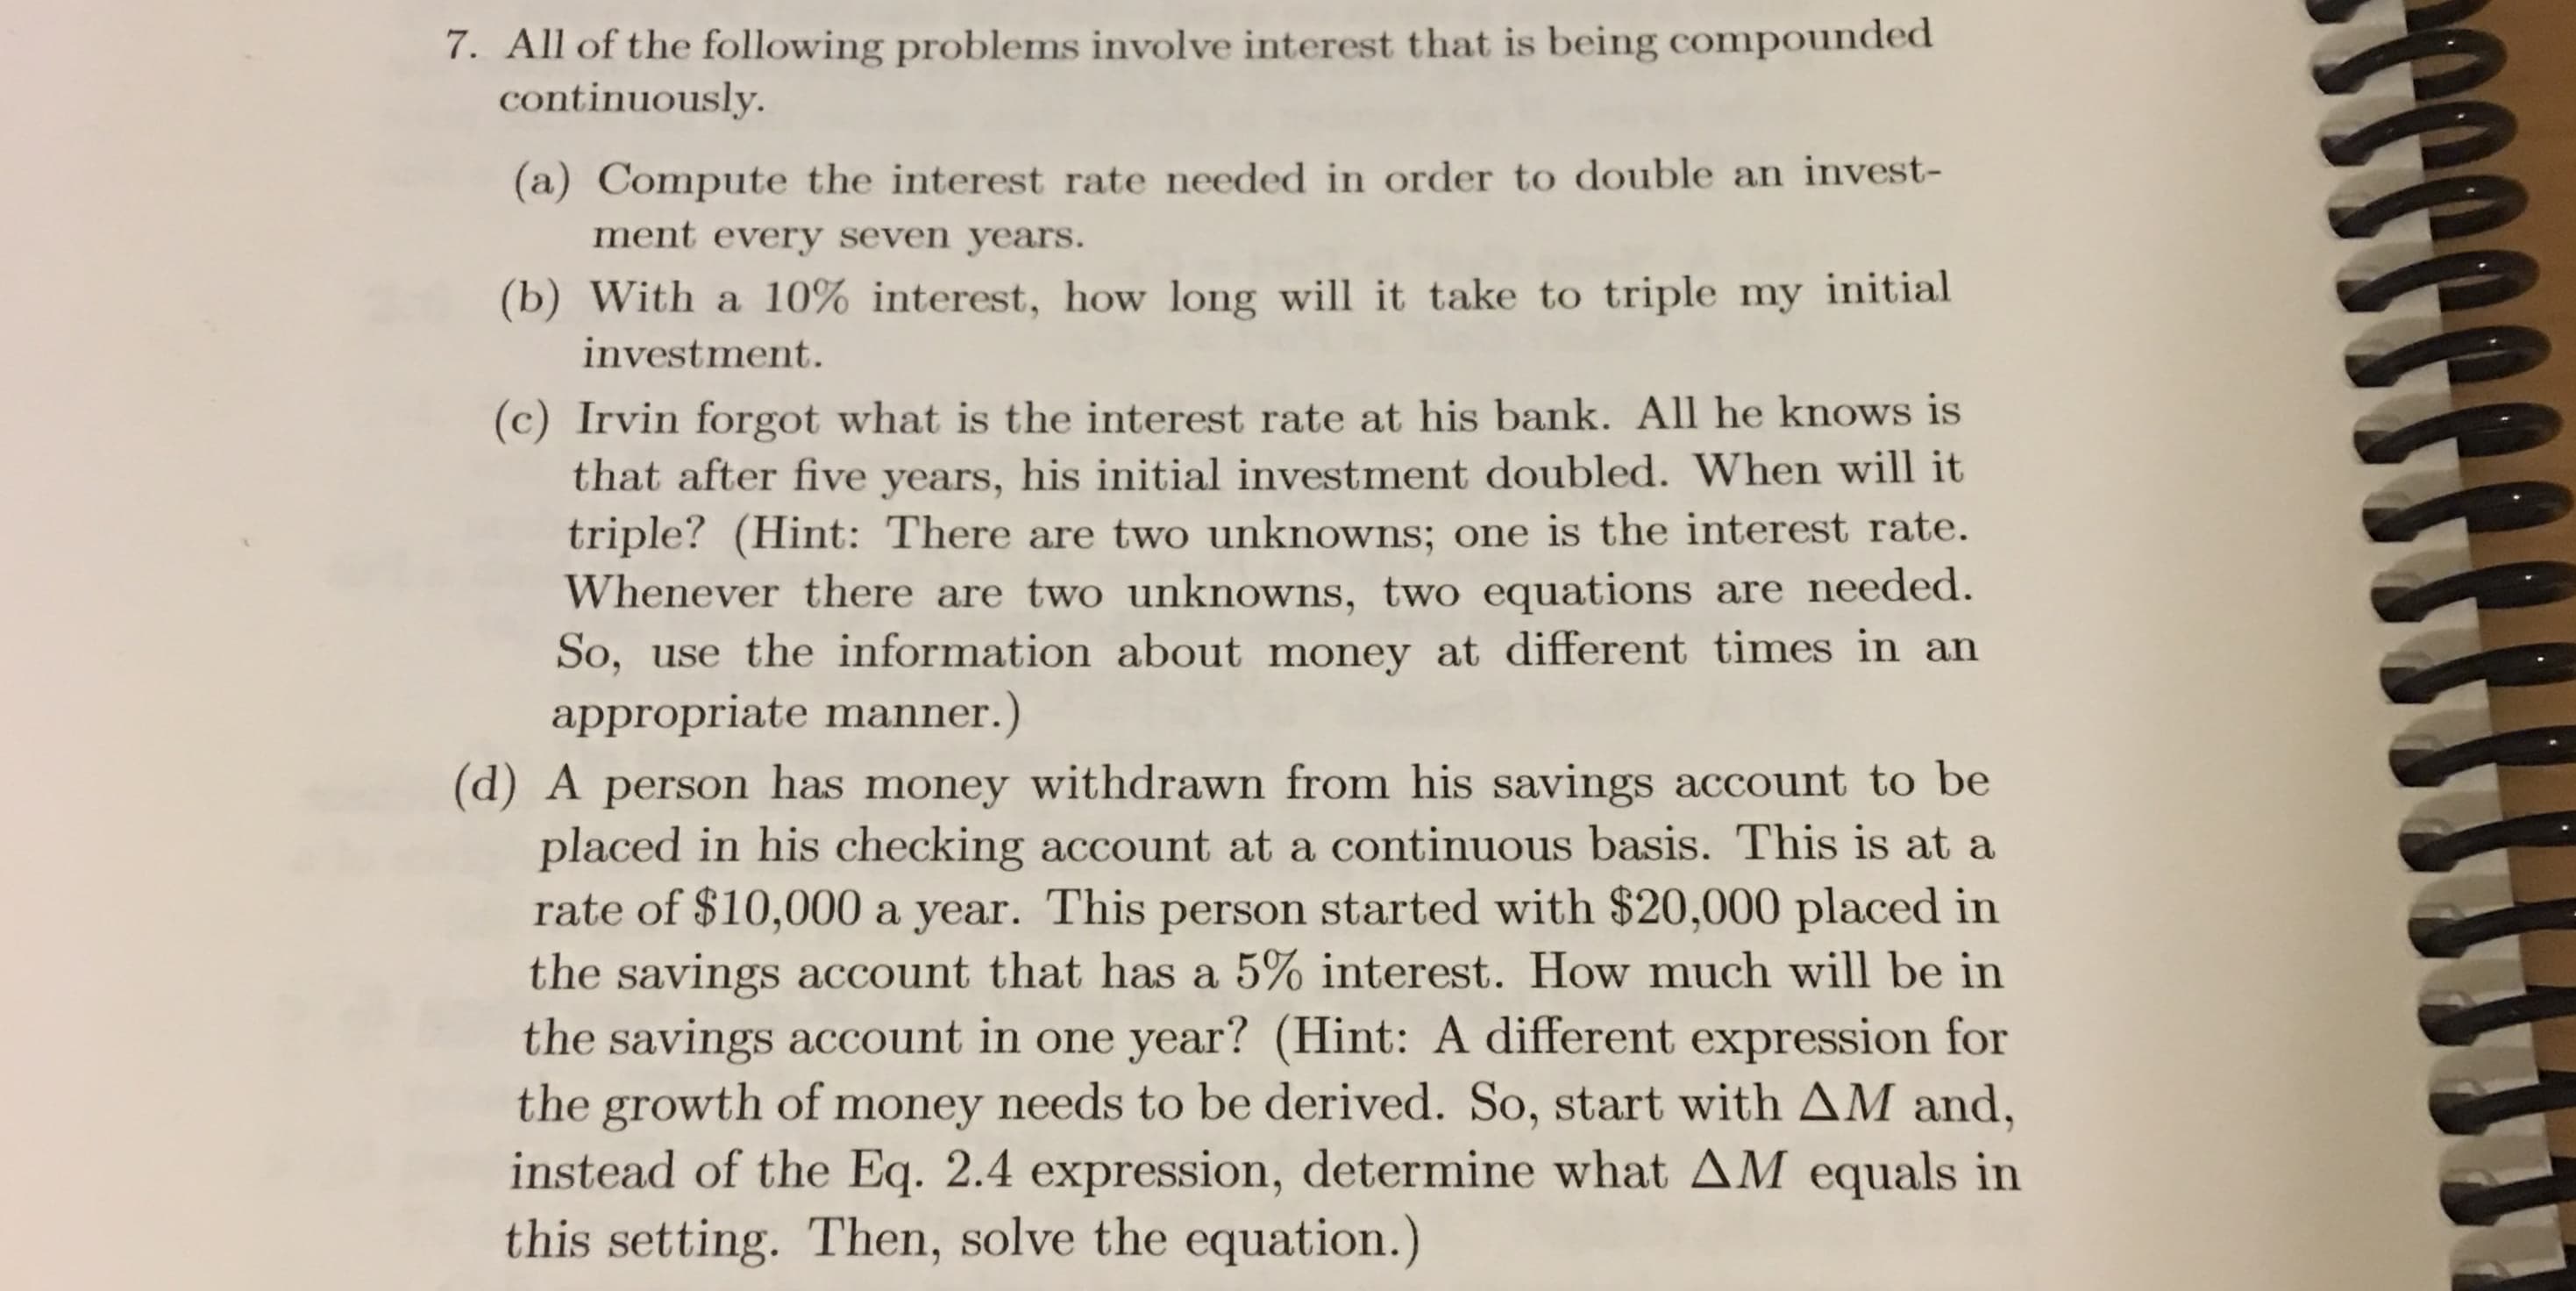 7. All of the following problems involve interest that is being compounded
continuously.
(a) Compute the interest rate needed in order to double an invest-
ment every seven years.
(b) With a 10% interest, how long will it take to triple my initial
investment.
(c) Irvin forgot what is the interest rate at his bank. All he knows is
that after five years, his initial investment doubled. When will it
triple? (Hint: There are two unknowns; one is the interest rate.
Whenever there are two unknowns, two equations are needed.
use the information about money at different times in an
So,
appropriate manner.)
(d) A person has money withdrawn from his savings account to be
placed in his checking account at a continuous basis. This is at a
rate of $10,000
the savings account that has a 5% interest. How much will be in
the savings account in one
the growth of money needs to be derived. So, start with AM and,
instead of the Eq. 2.4 expression, determine what AM equals in
this setting. Then, solve the equation.)
a year. This person started with $20,000 placed in
year? (Hint: A different expression for
